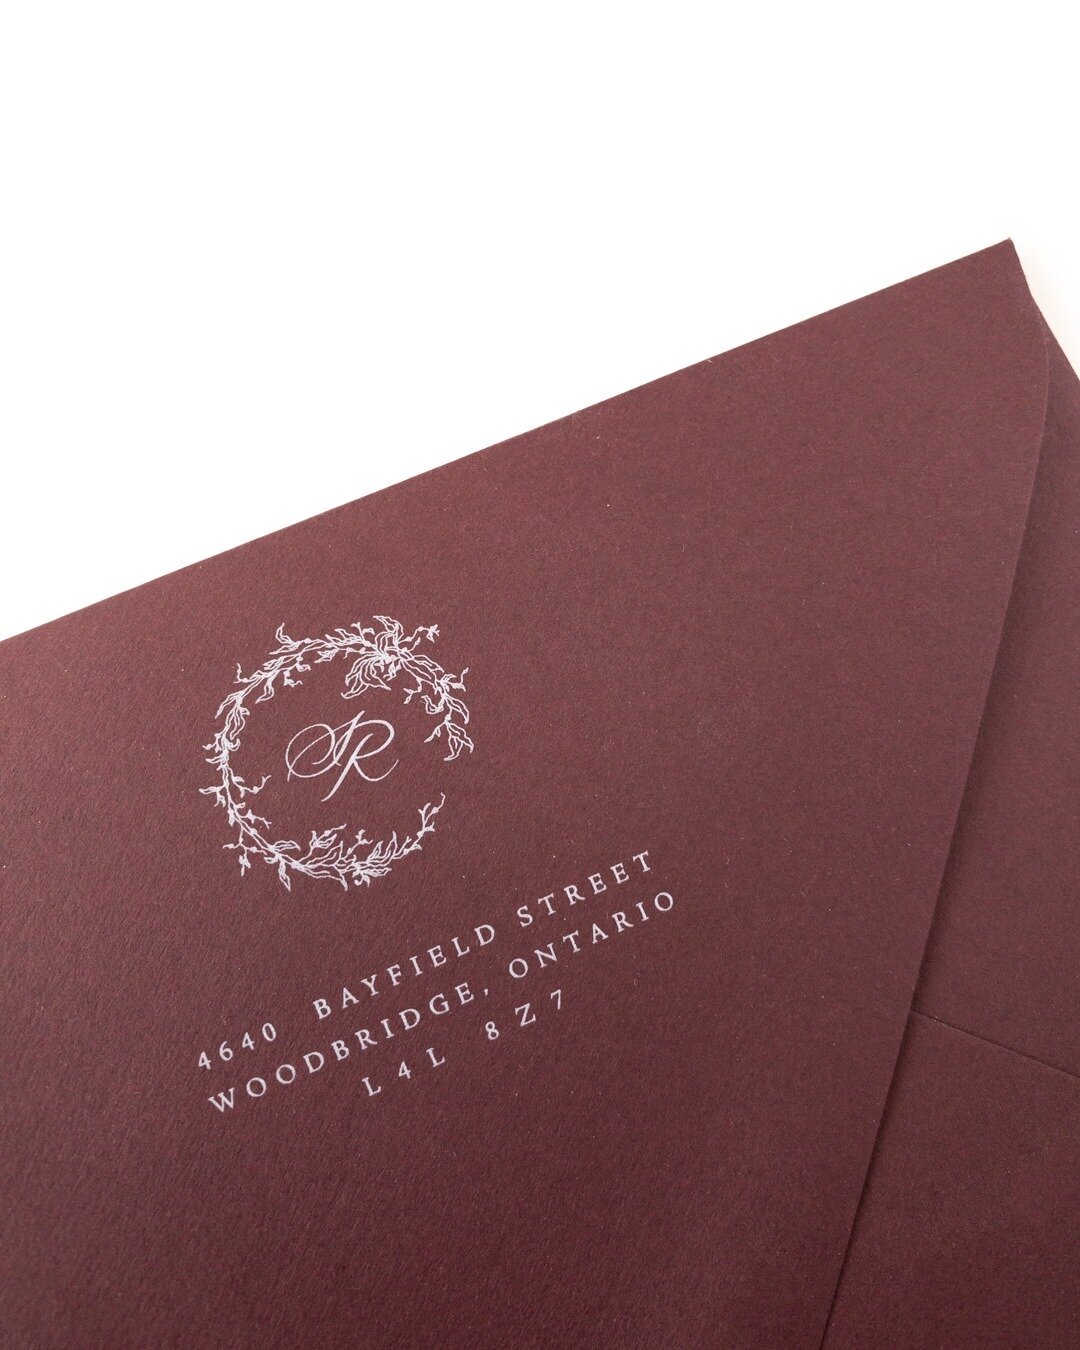 Today we are thankful to be a part of this amazing community. To share special moments with wonderful people, and to be a small part of peoples' special days. Happy Thanksgiving! White ink printing on Colorplan Claret envelope.